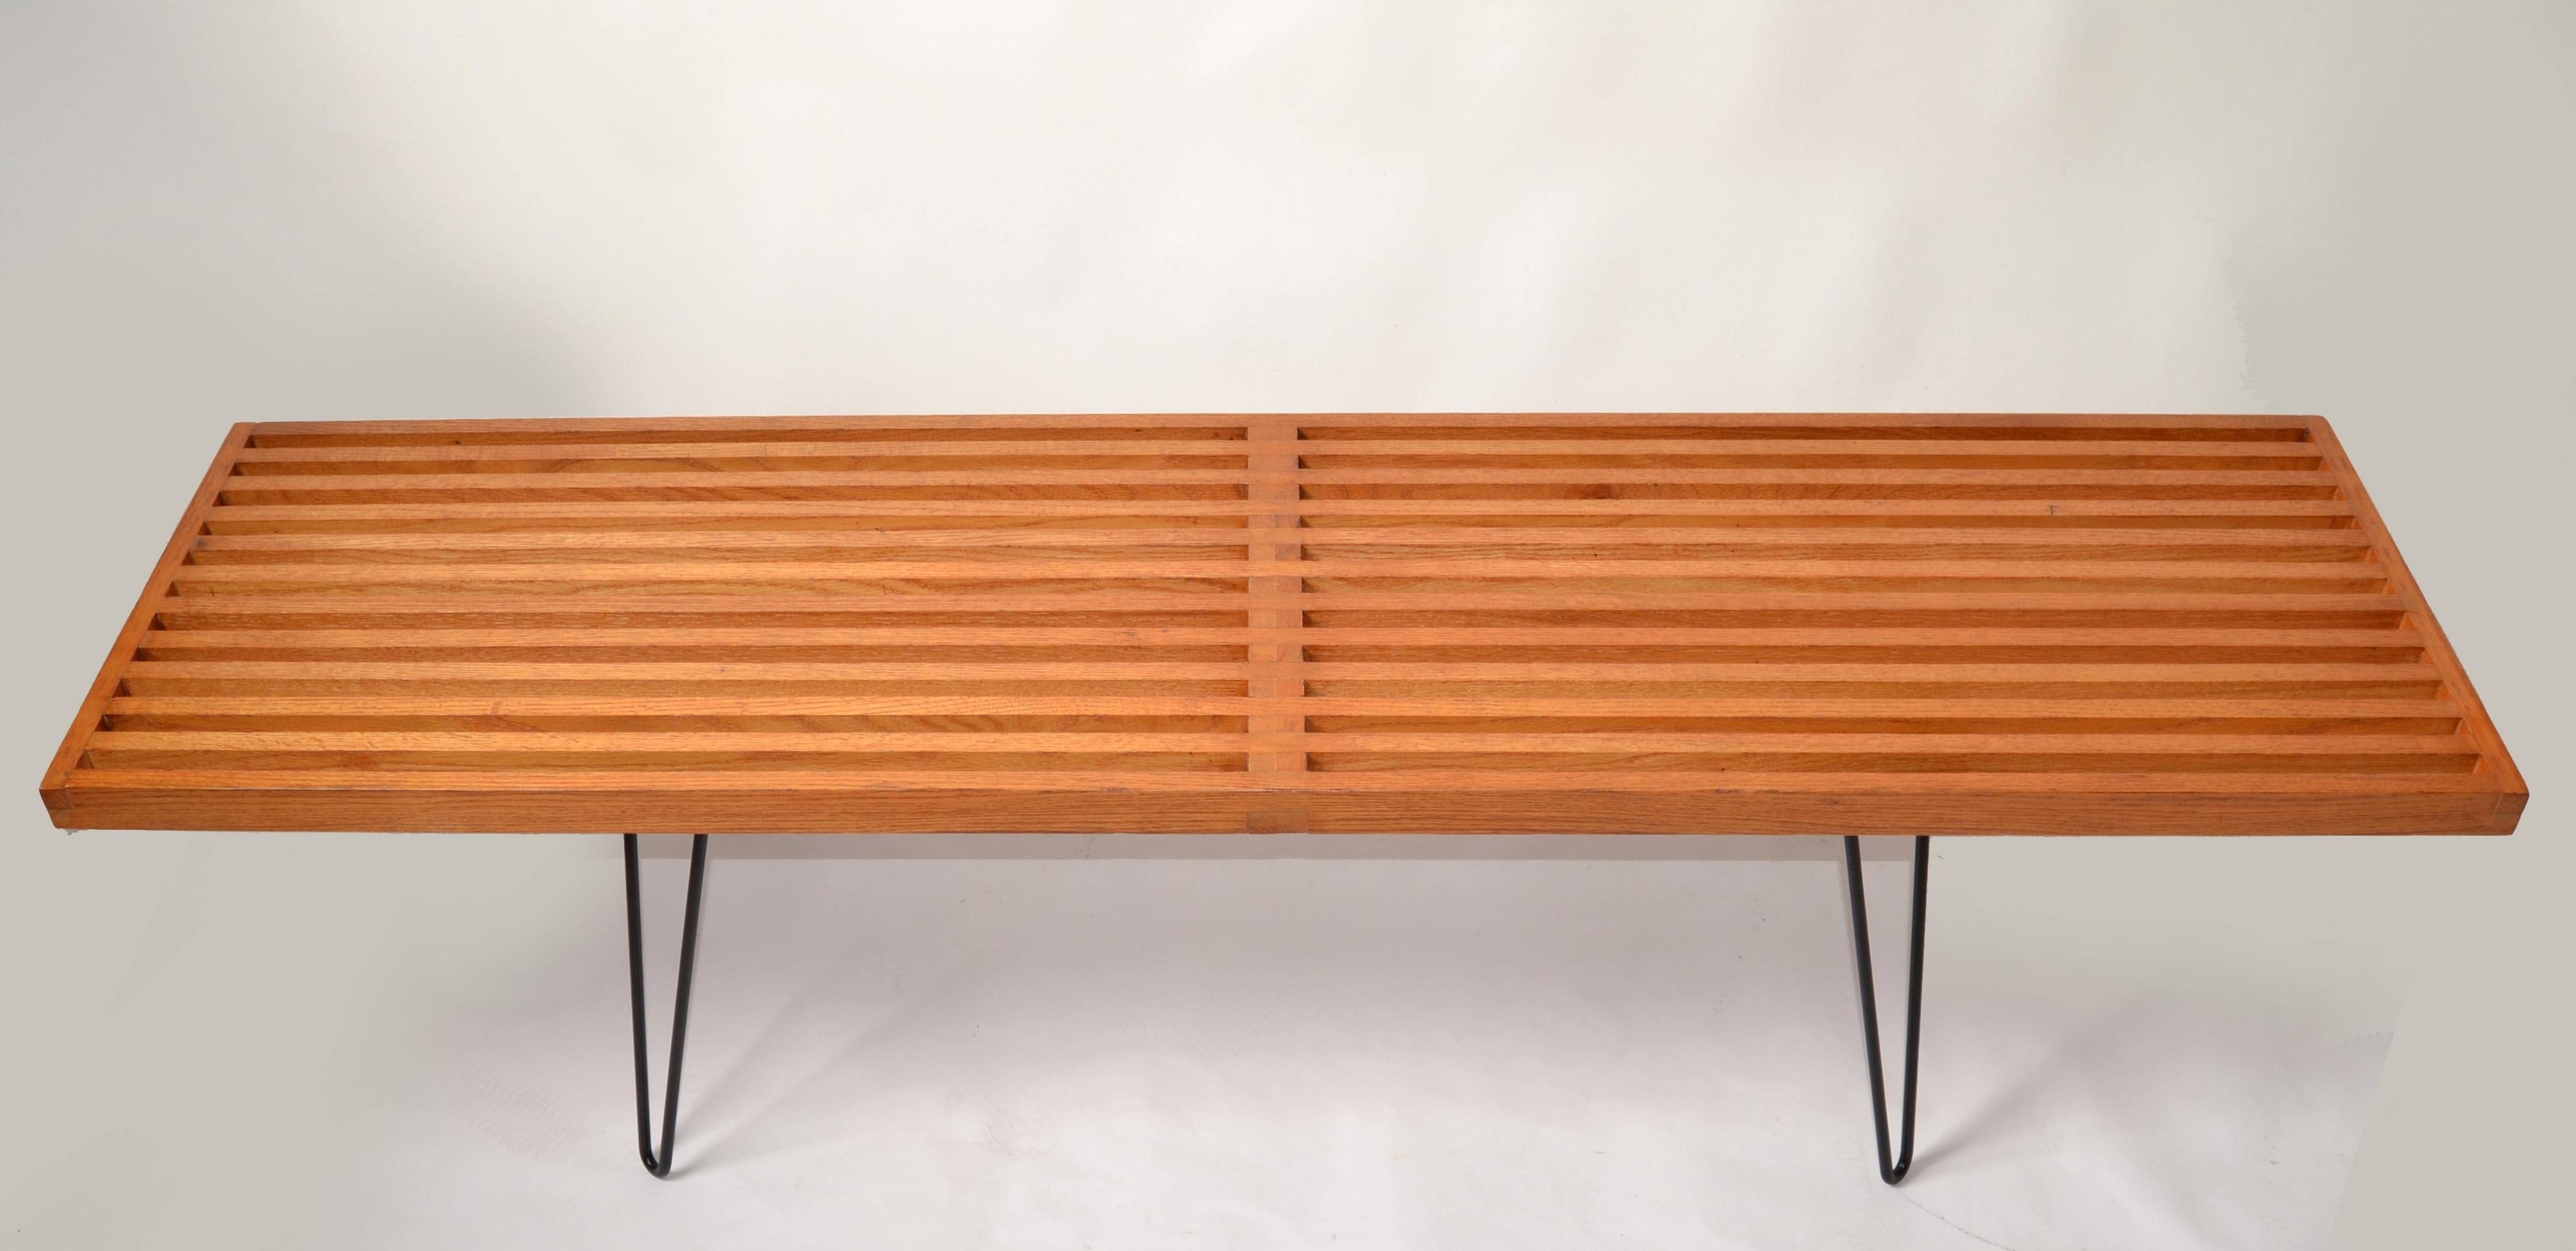 Great Looking Georg Nelson Style Oak Slat Bench with black Steel Hairpin Legs. Knoll attributed Mid-Century Modern Classic Design made in the USA circa 1980s.
Features a dovetailed Slat Seating Plattform supported by 4 black glossy finished Steel